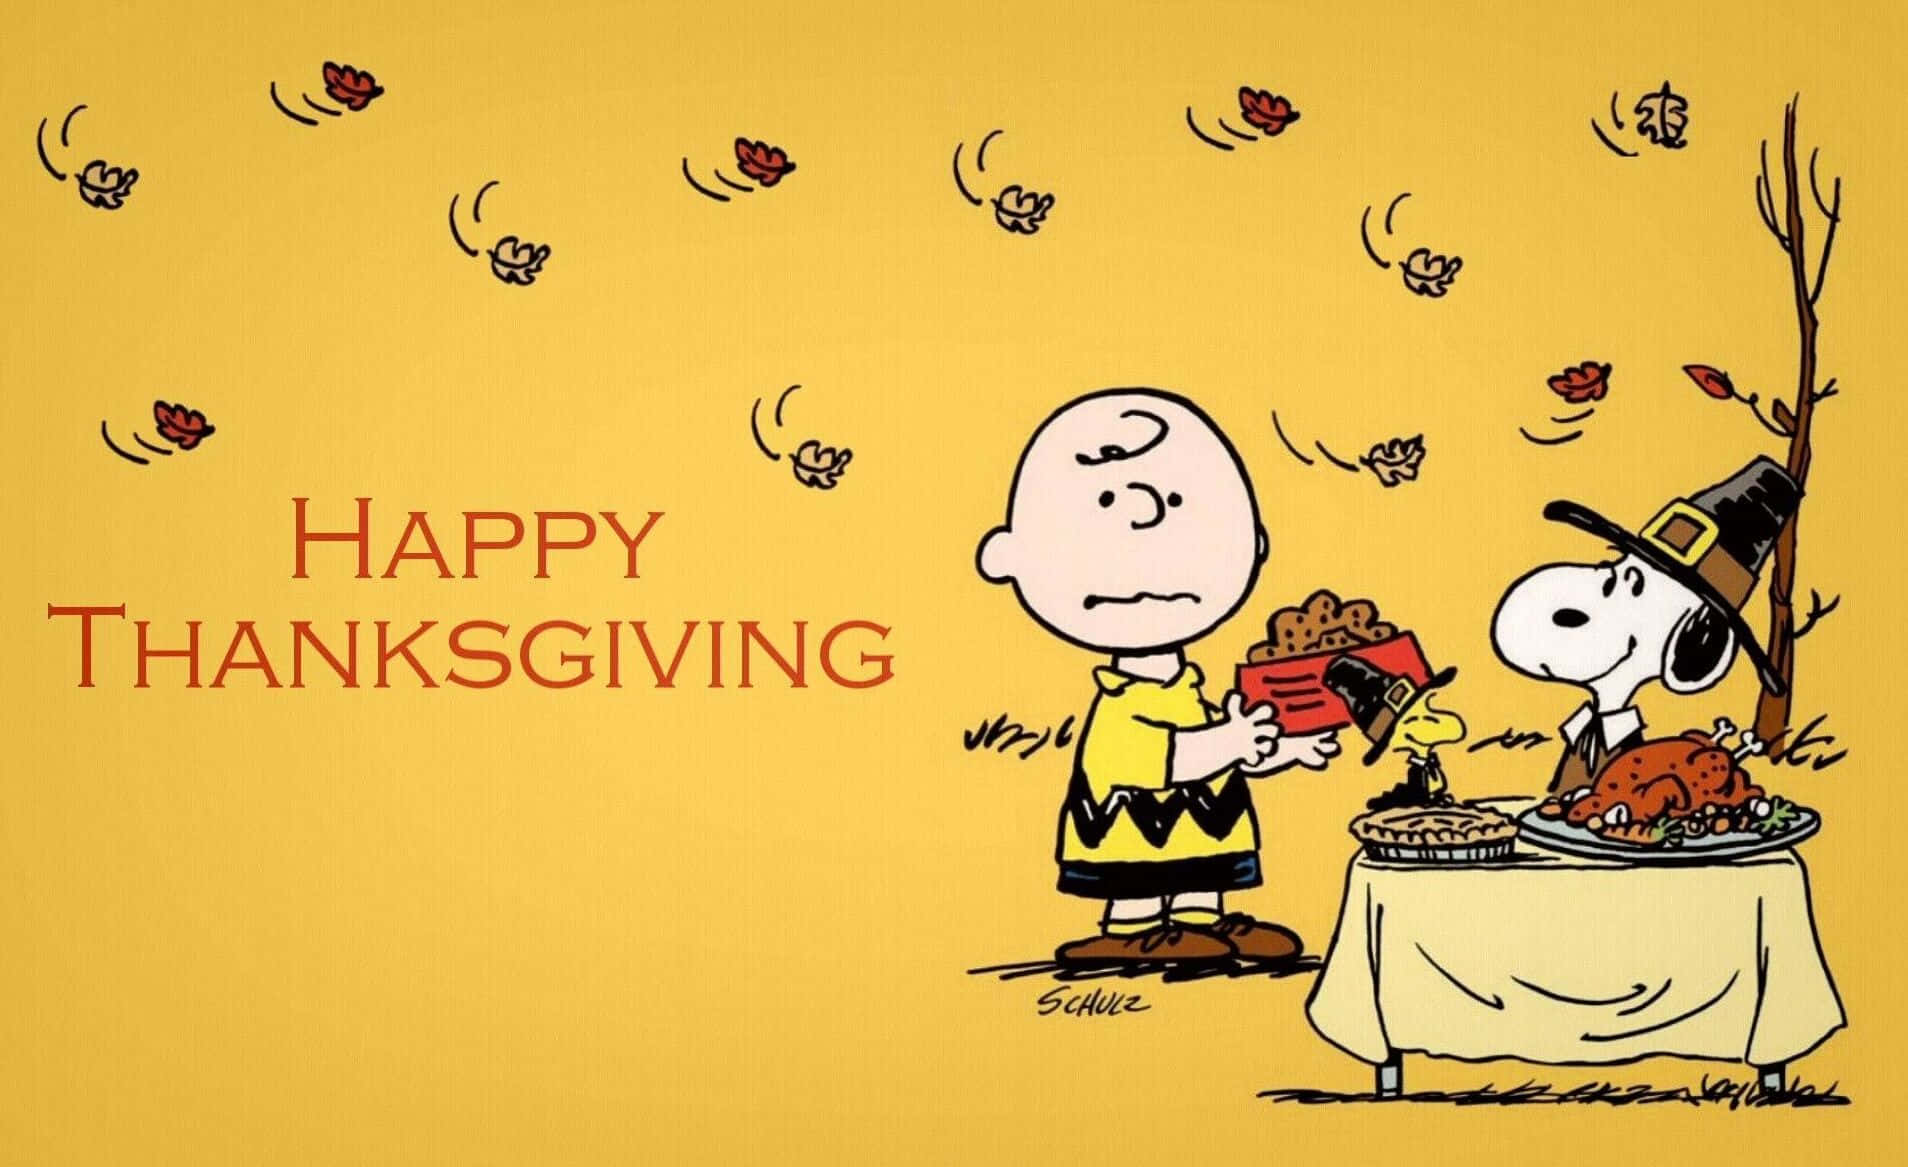 Charlie Brown And Peanuts Are Sitting At A Table With Thanksgiving